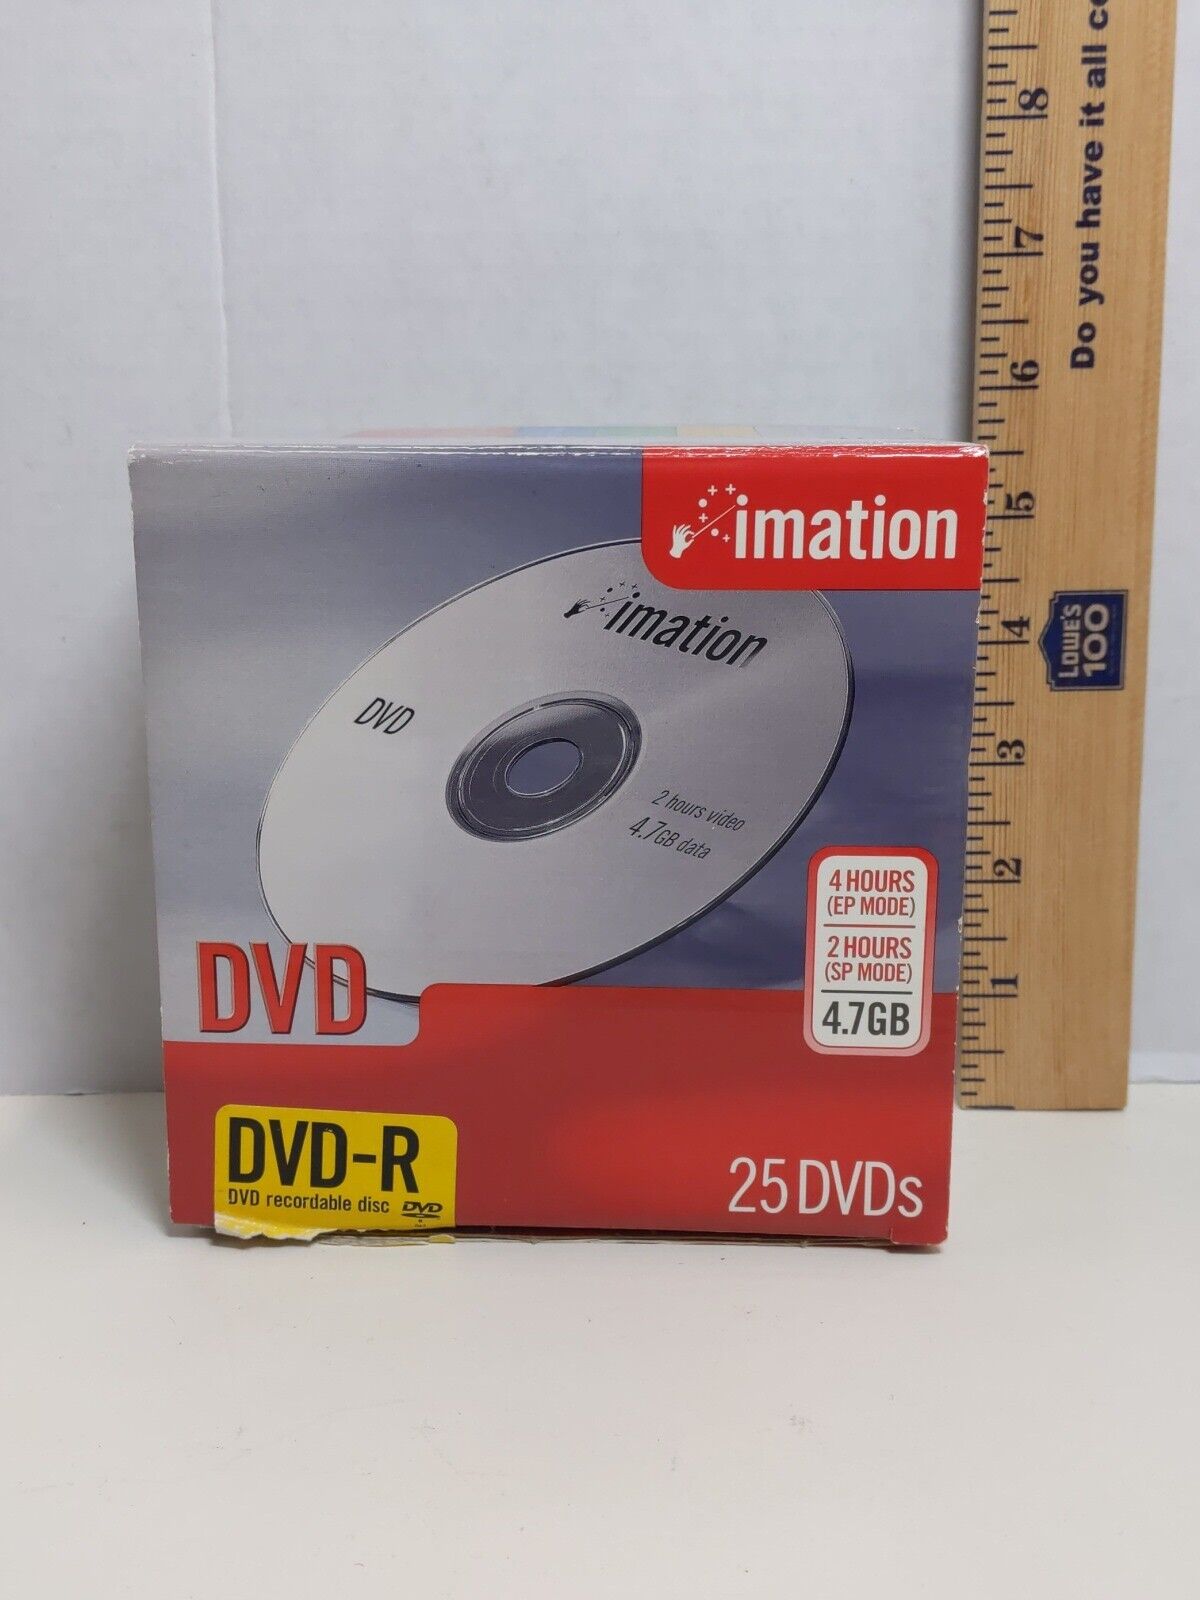 Imation DVD-R 25 DVDs 4.7 GB Recordable Disc